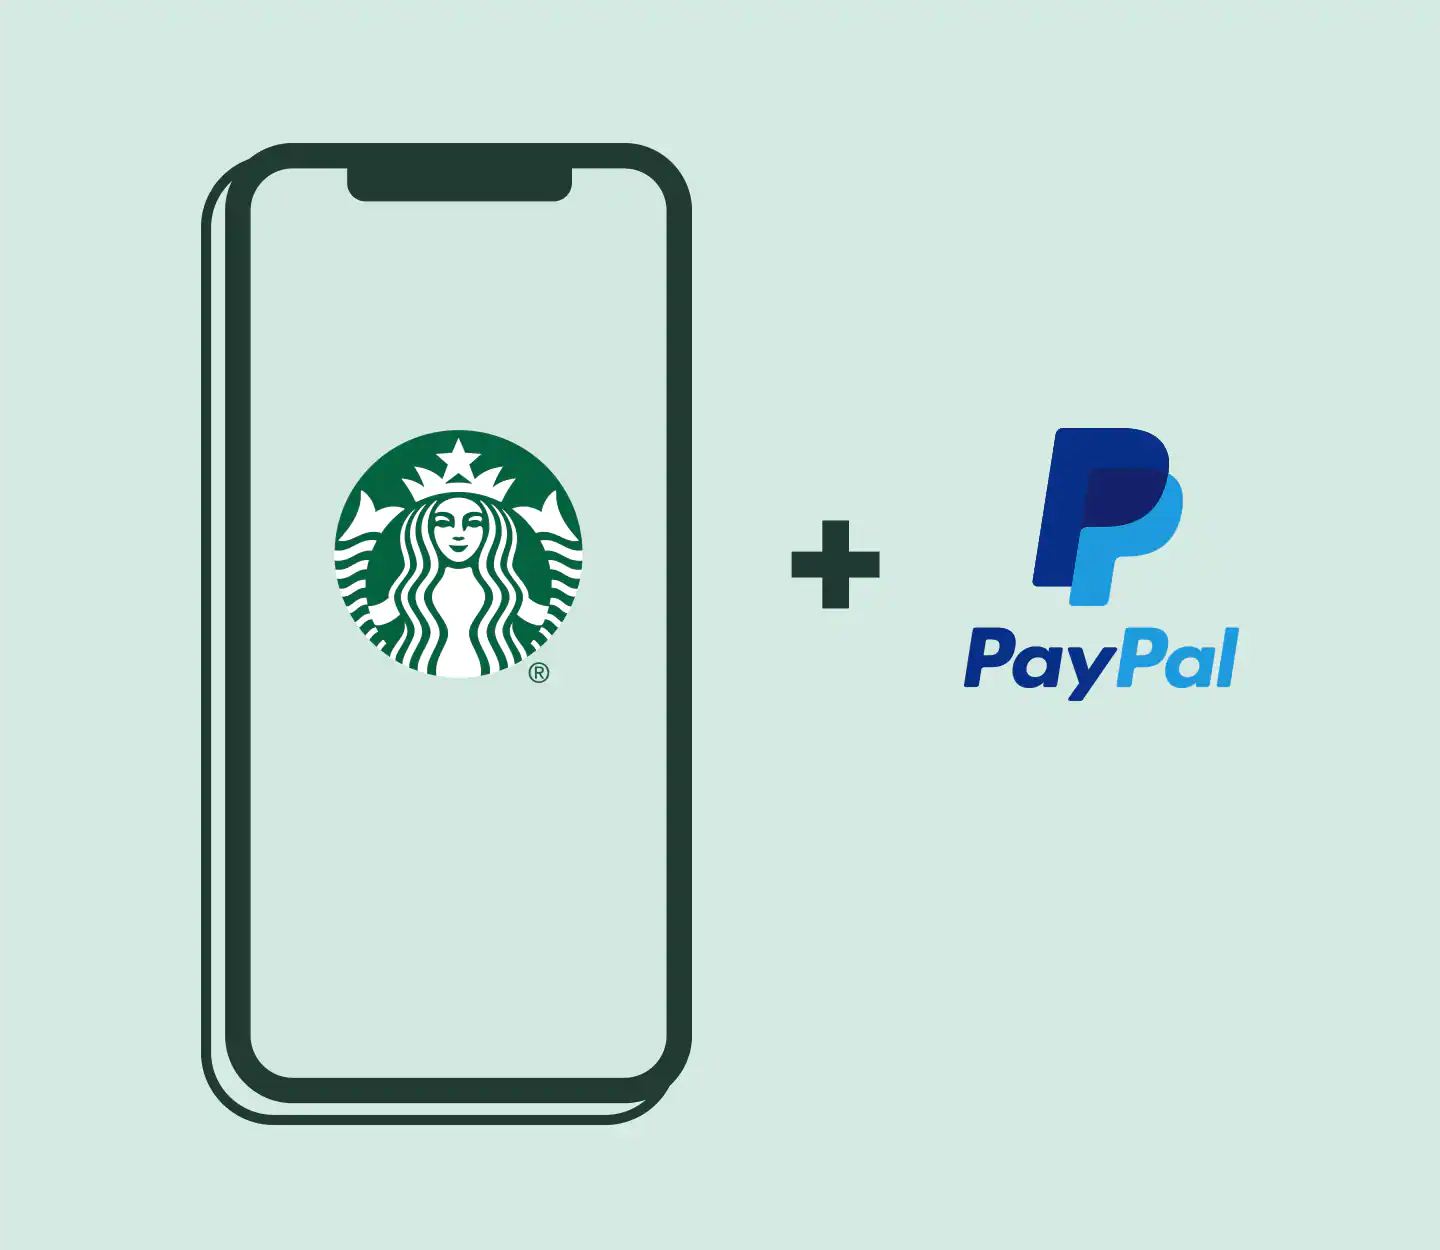 $3 Off $5 Starbucks Purchase When You Pay with PayPal at Checkout (FIRST 250,000 Only)